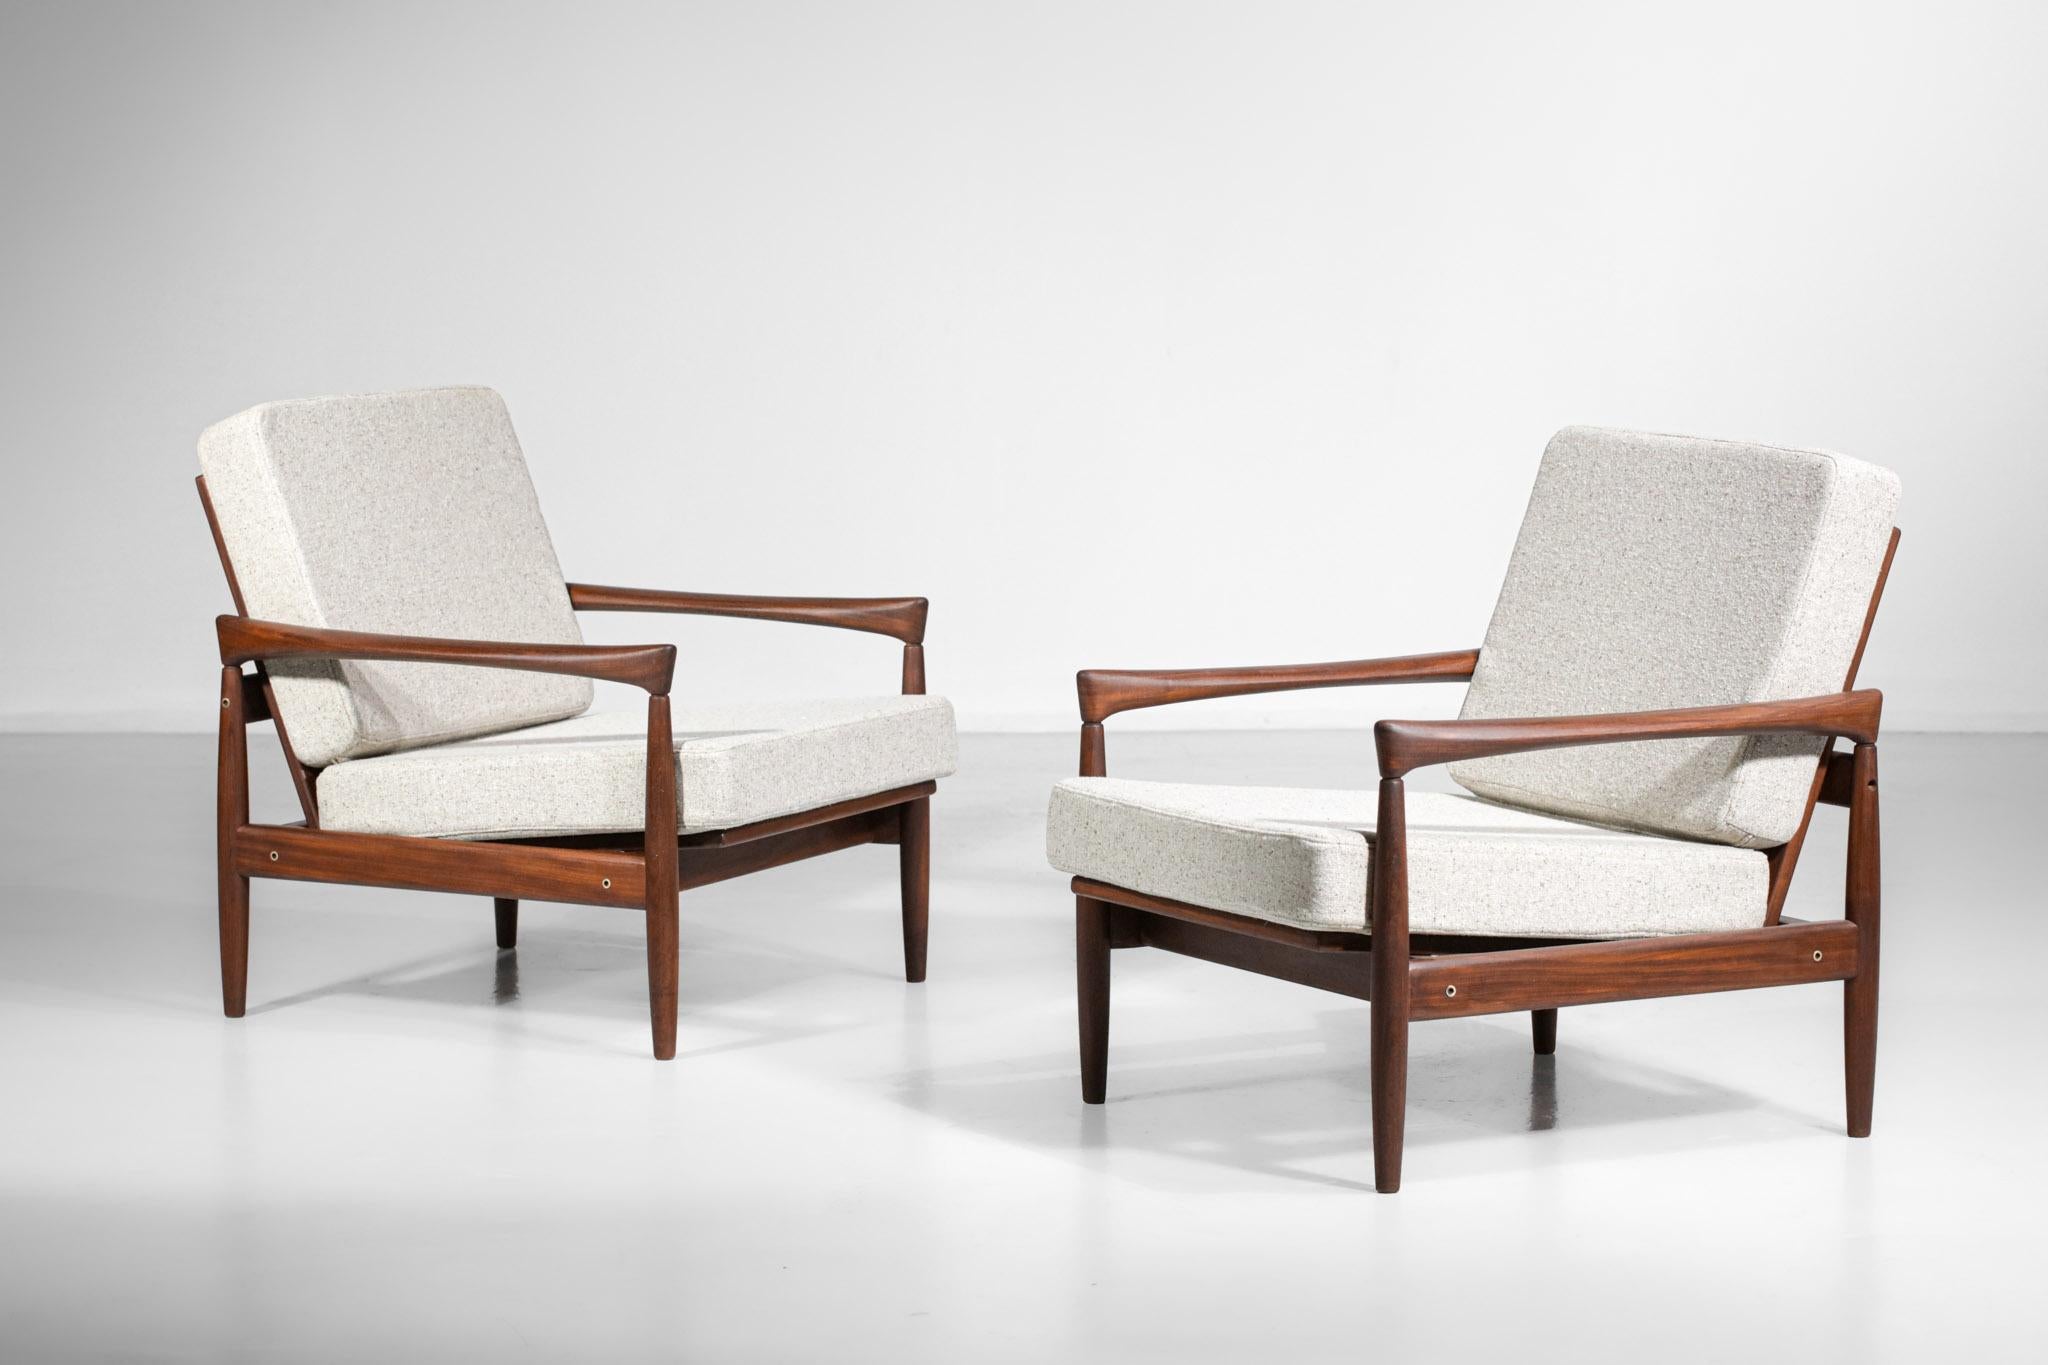 Nice pair of Scandinavian armchairs from the 60's by the Danish designer Erik Worts. Very nice vintage condition of the solid teak structures with typical Scandinavian furniture lines of the time. The seat covers have been refurbished in beige wool